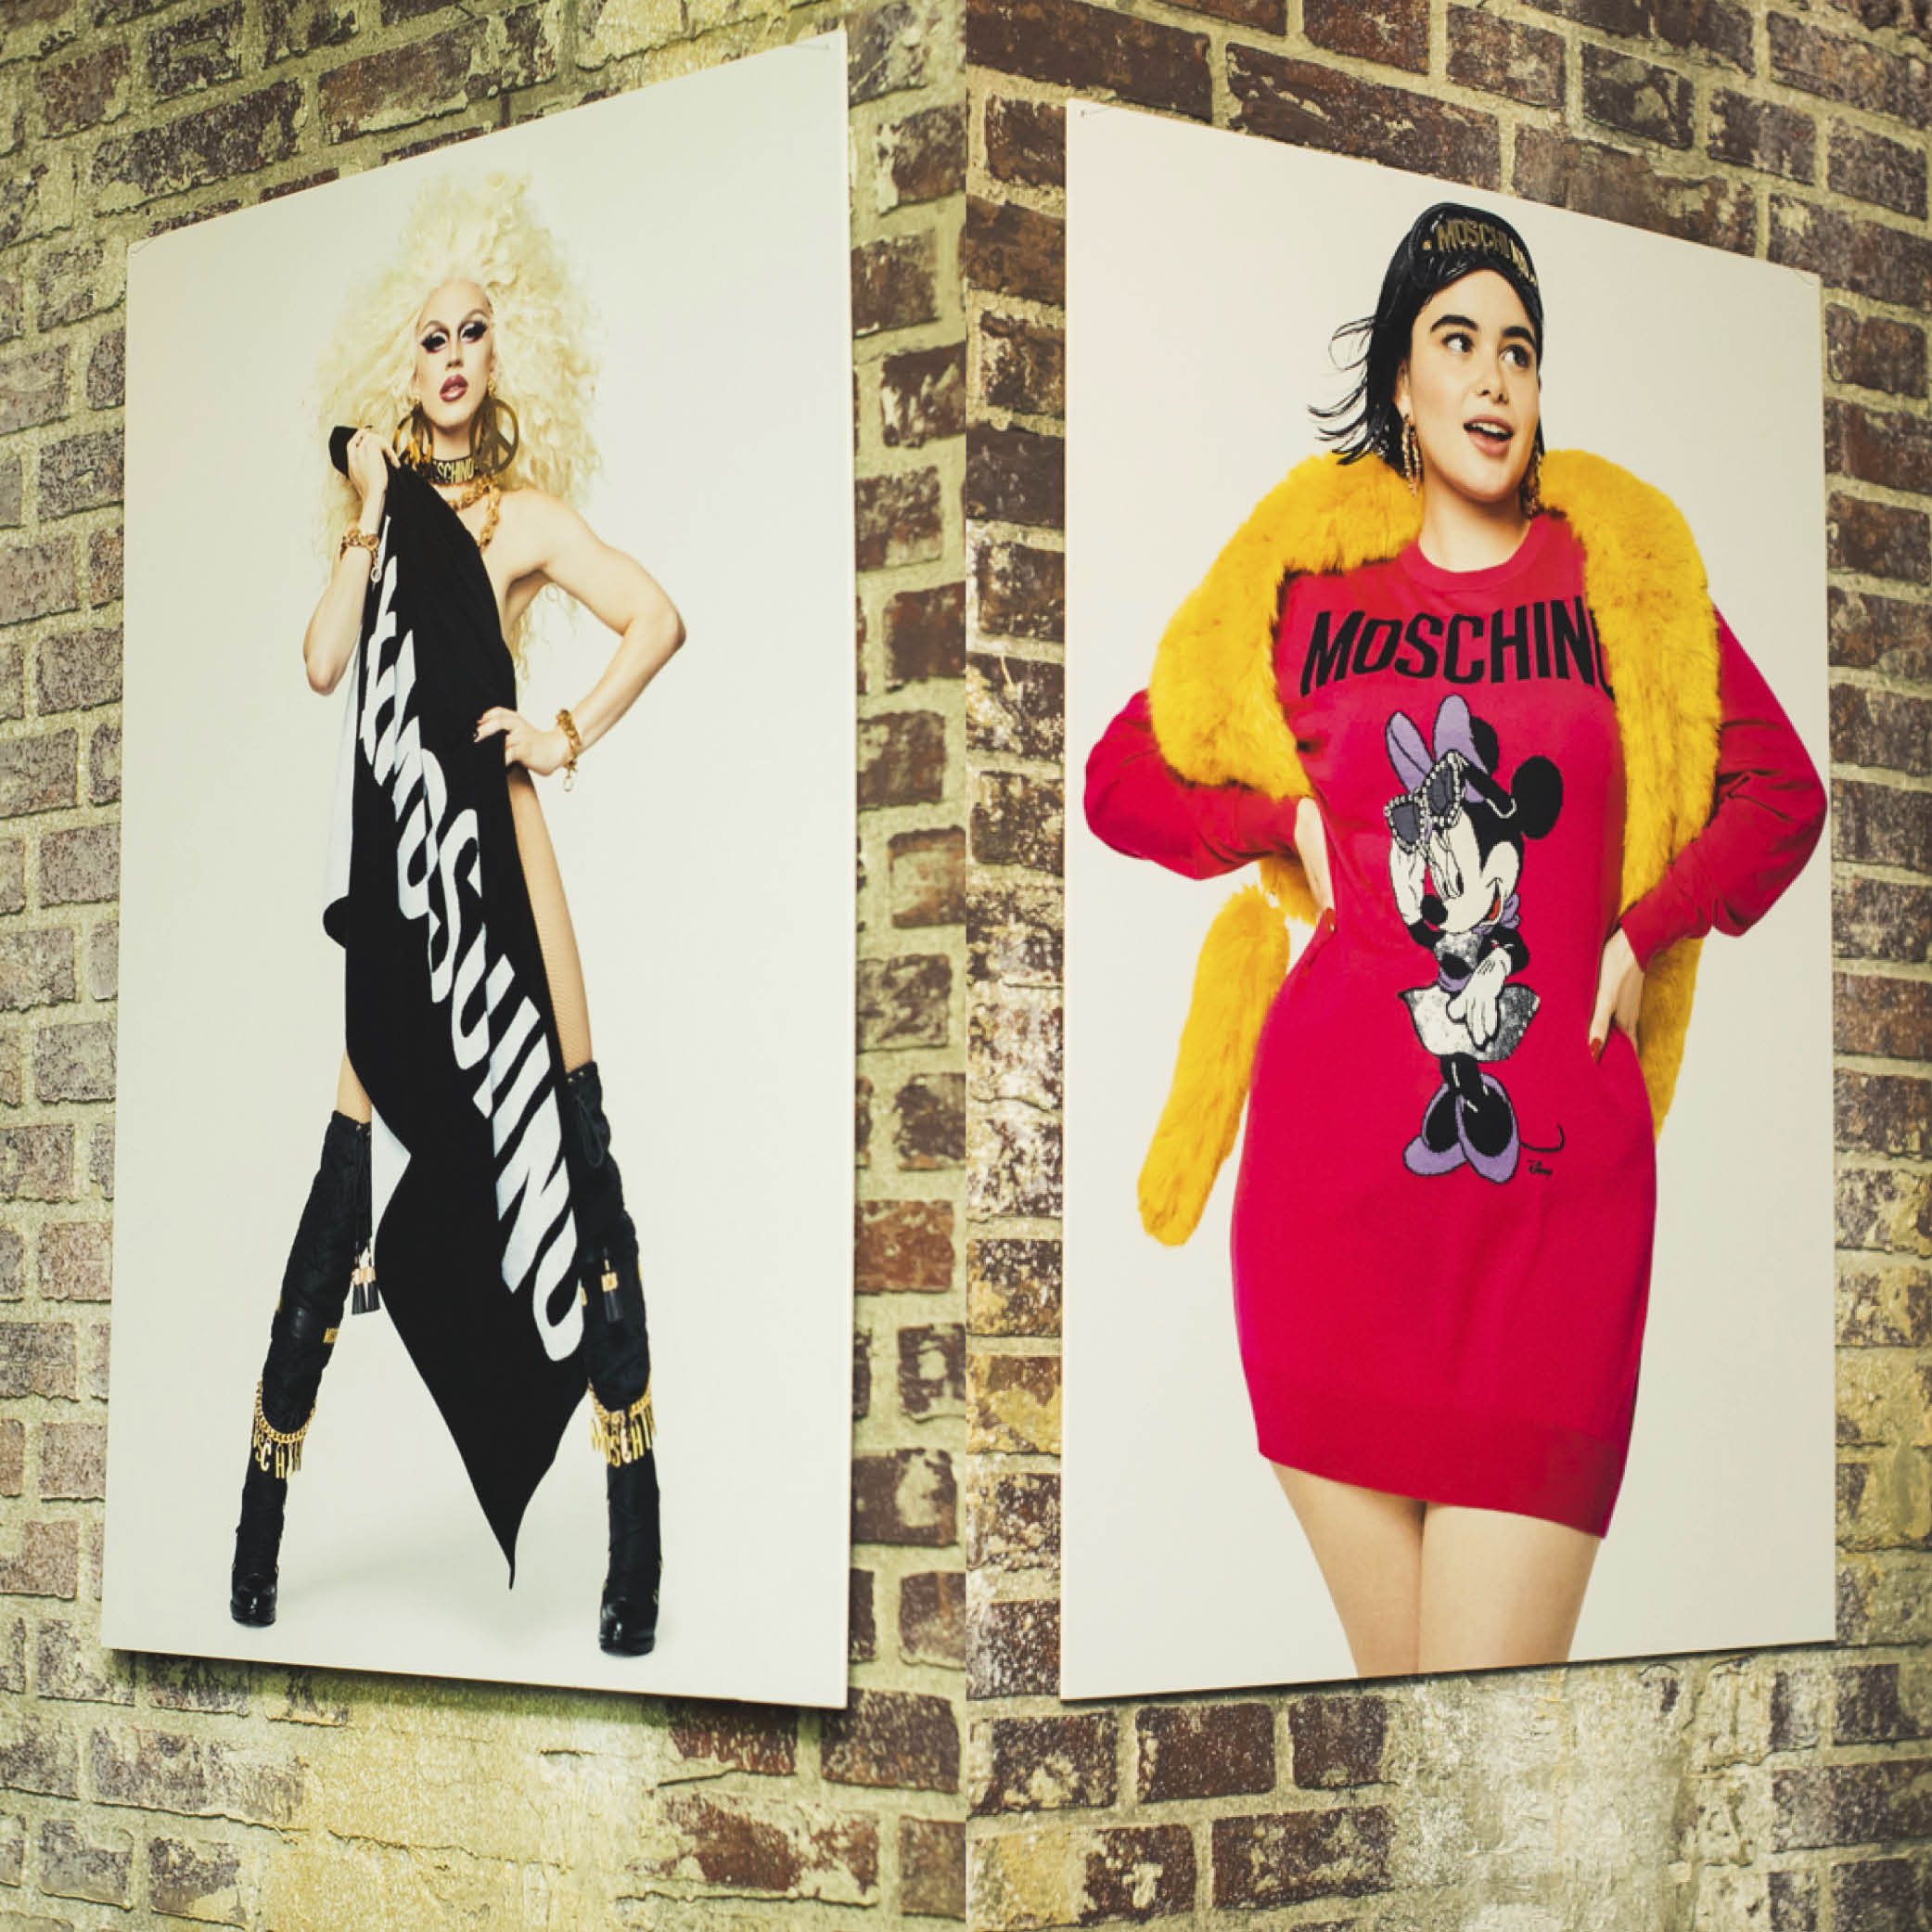 website foto hm moschino posters 500px